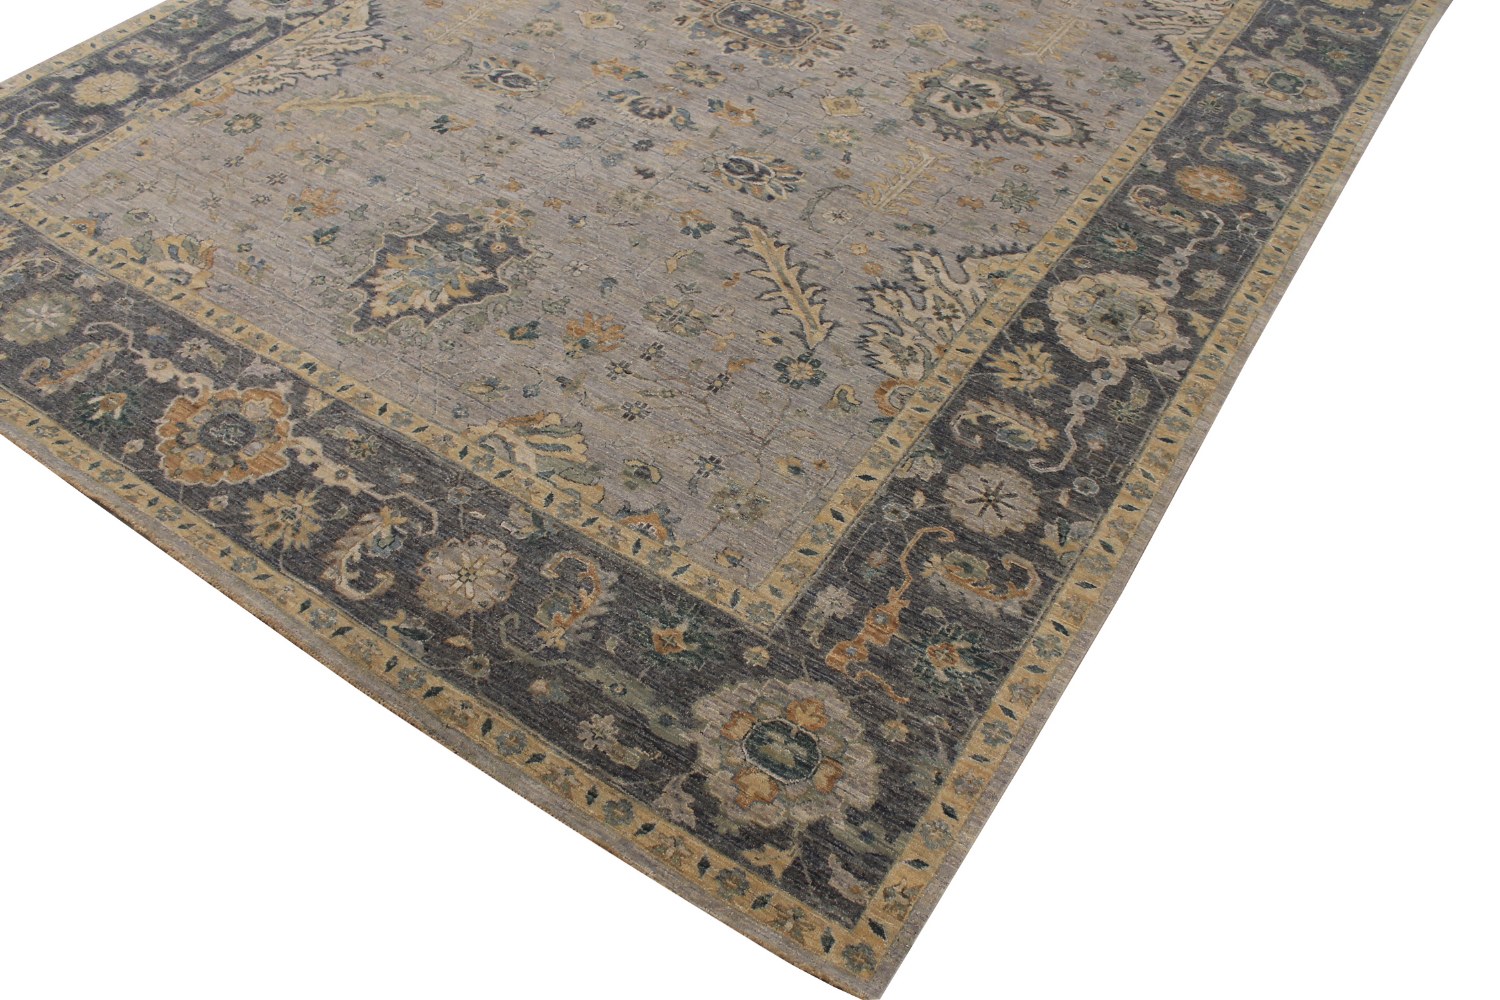 10x14 Traditional Hand Knotted Wool Area Rug - MR028620